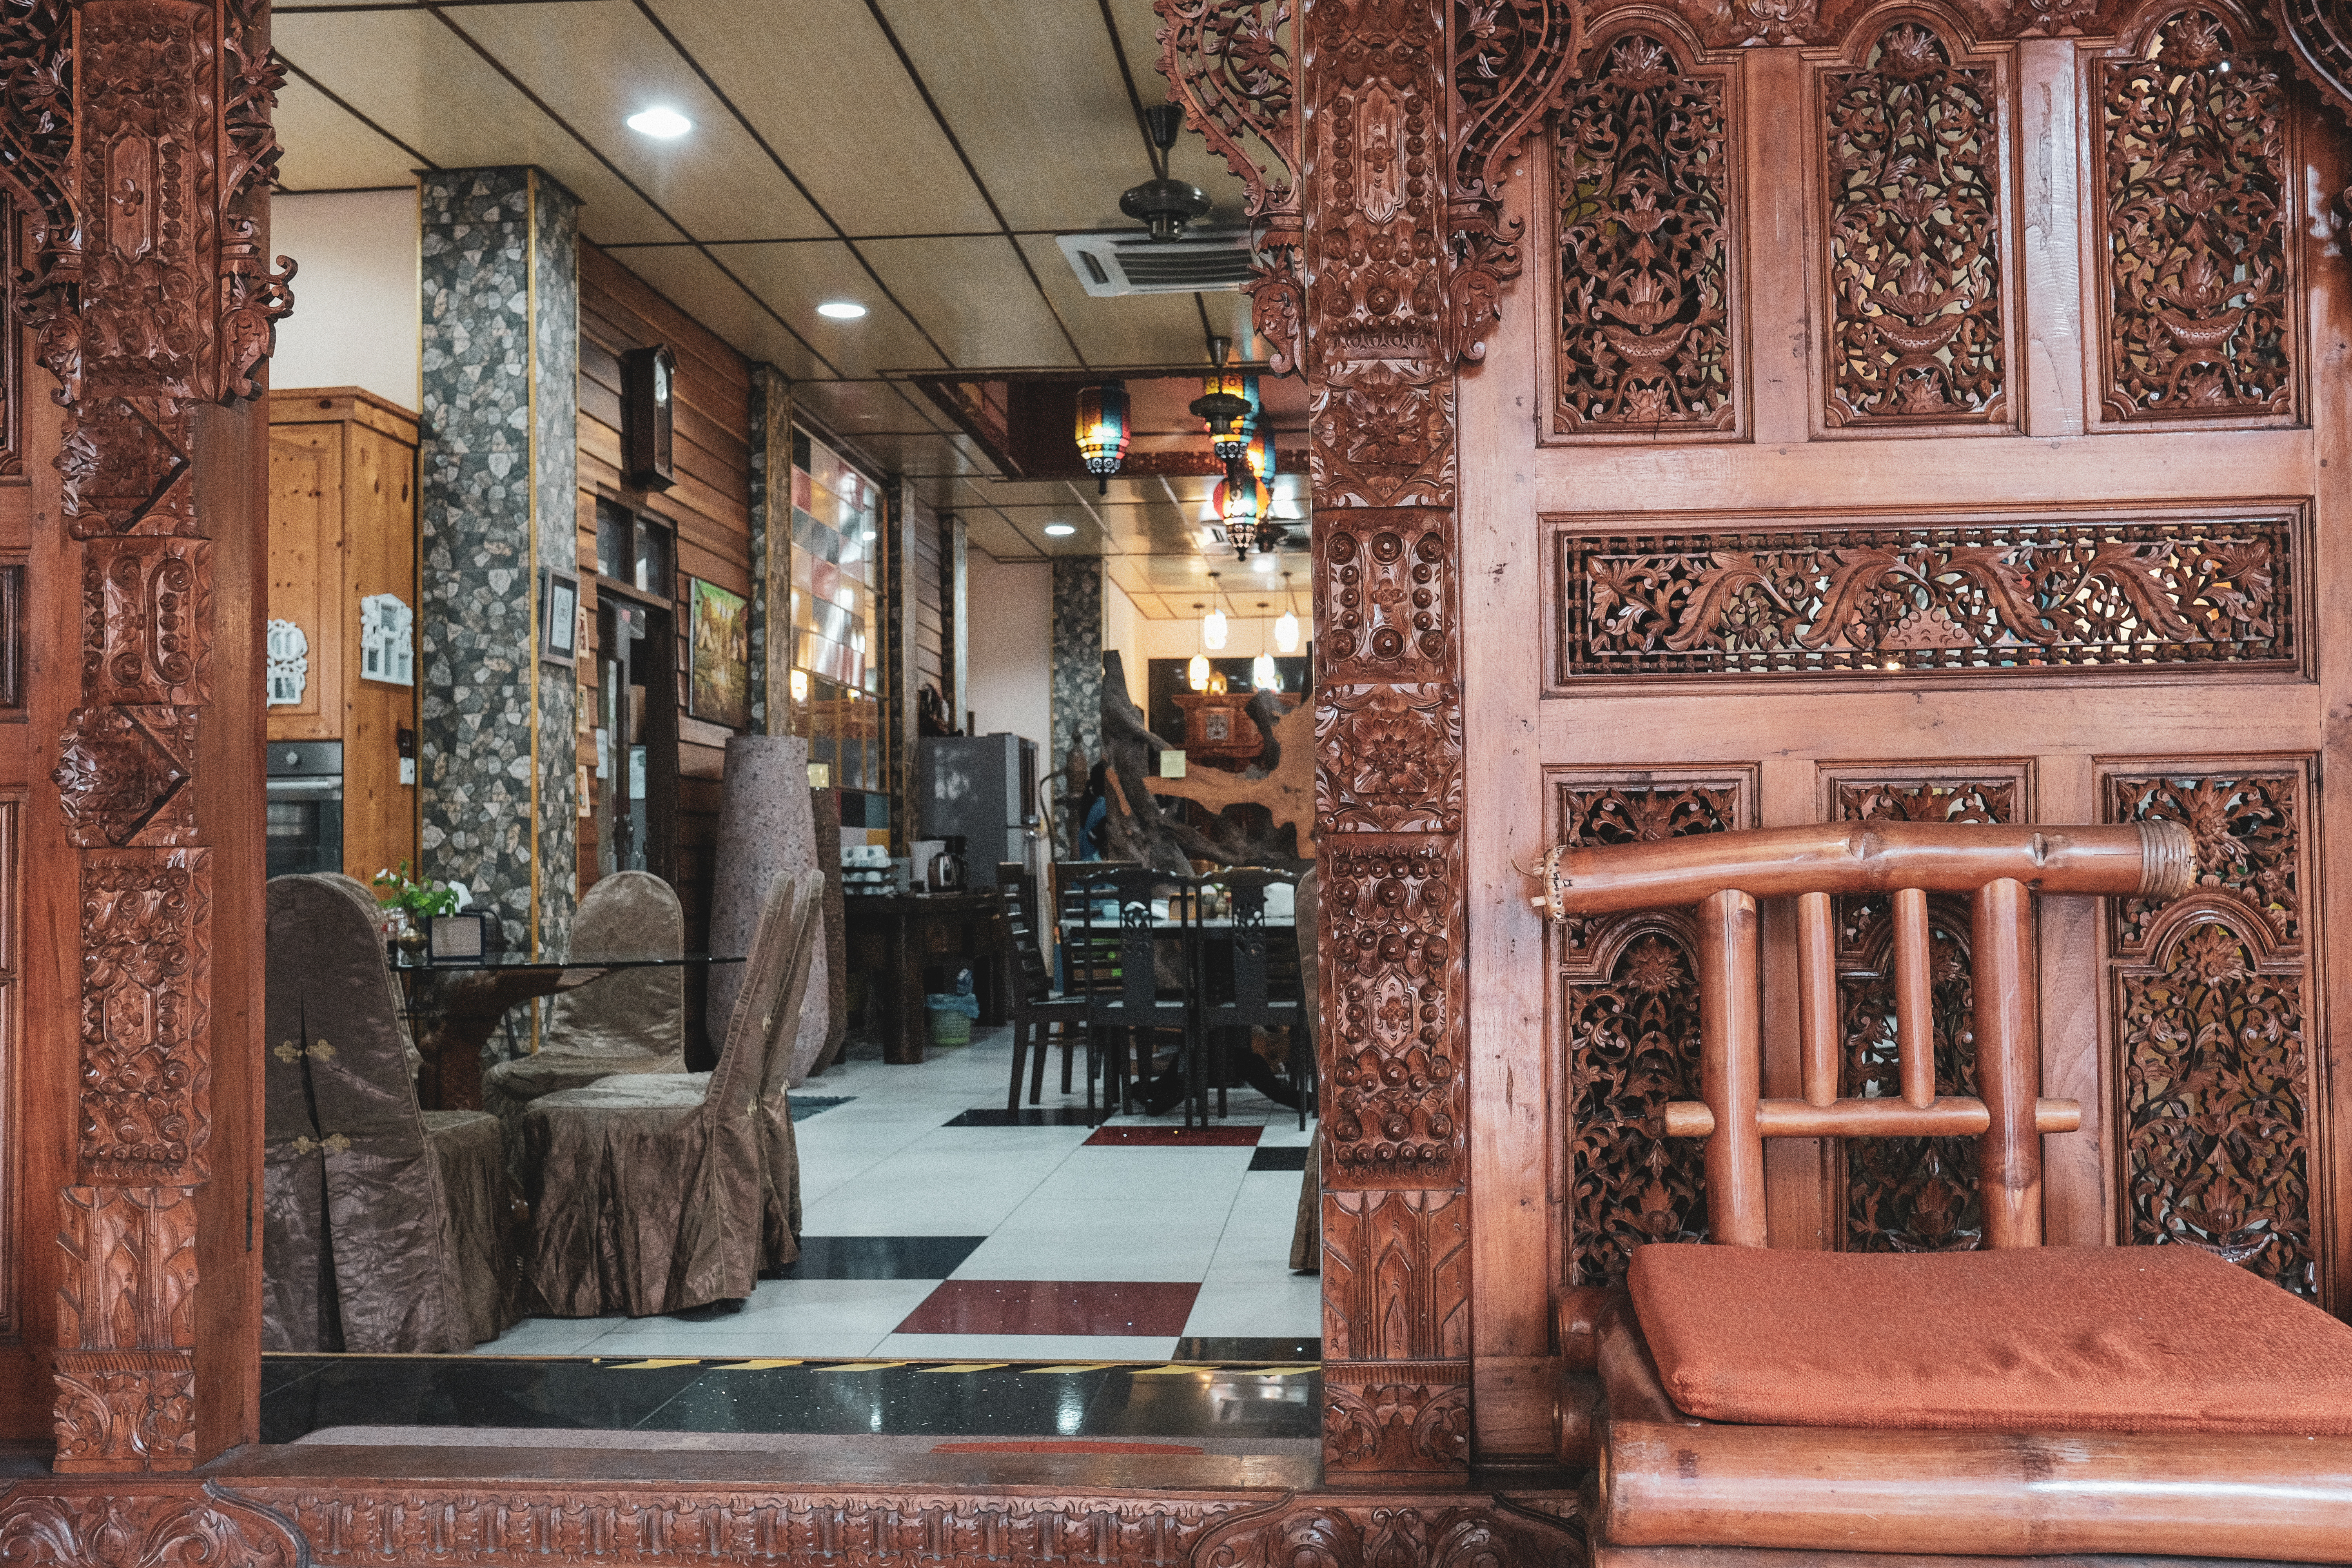 This intricately carved door from Bali welcomes guests to enter the dining room, which houses the reception too.